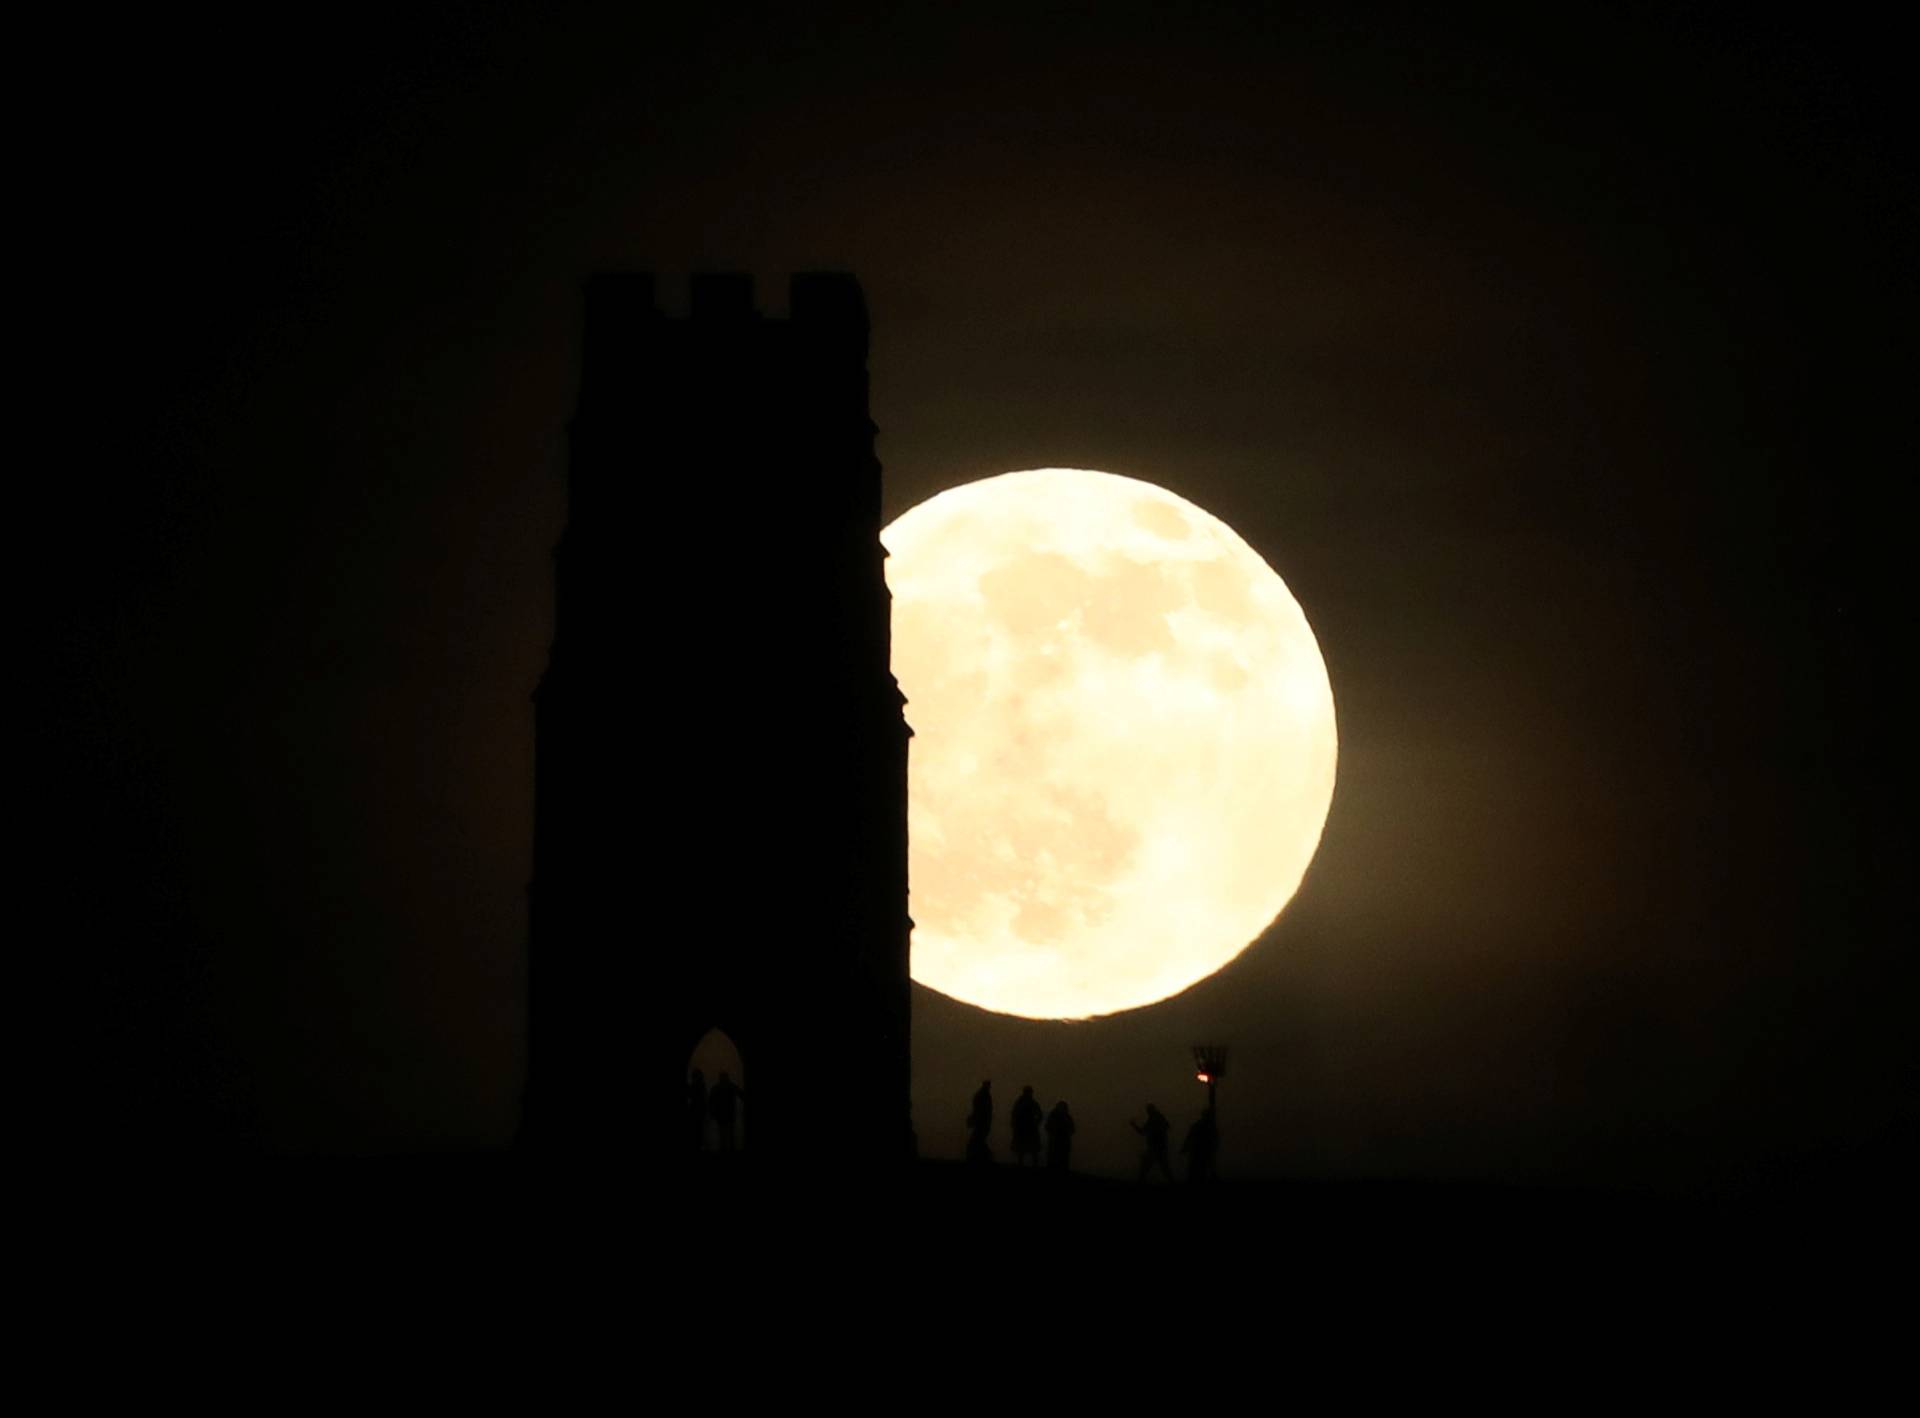 St Michael's Tower is seen on Glastonbury Tor as a full moon rises in Glastonbury